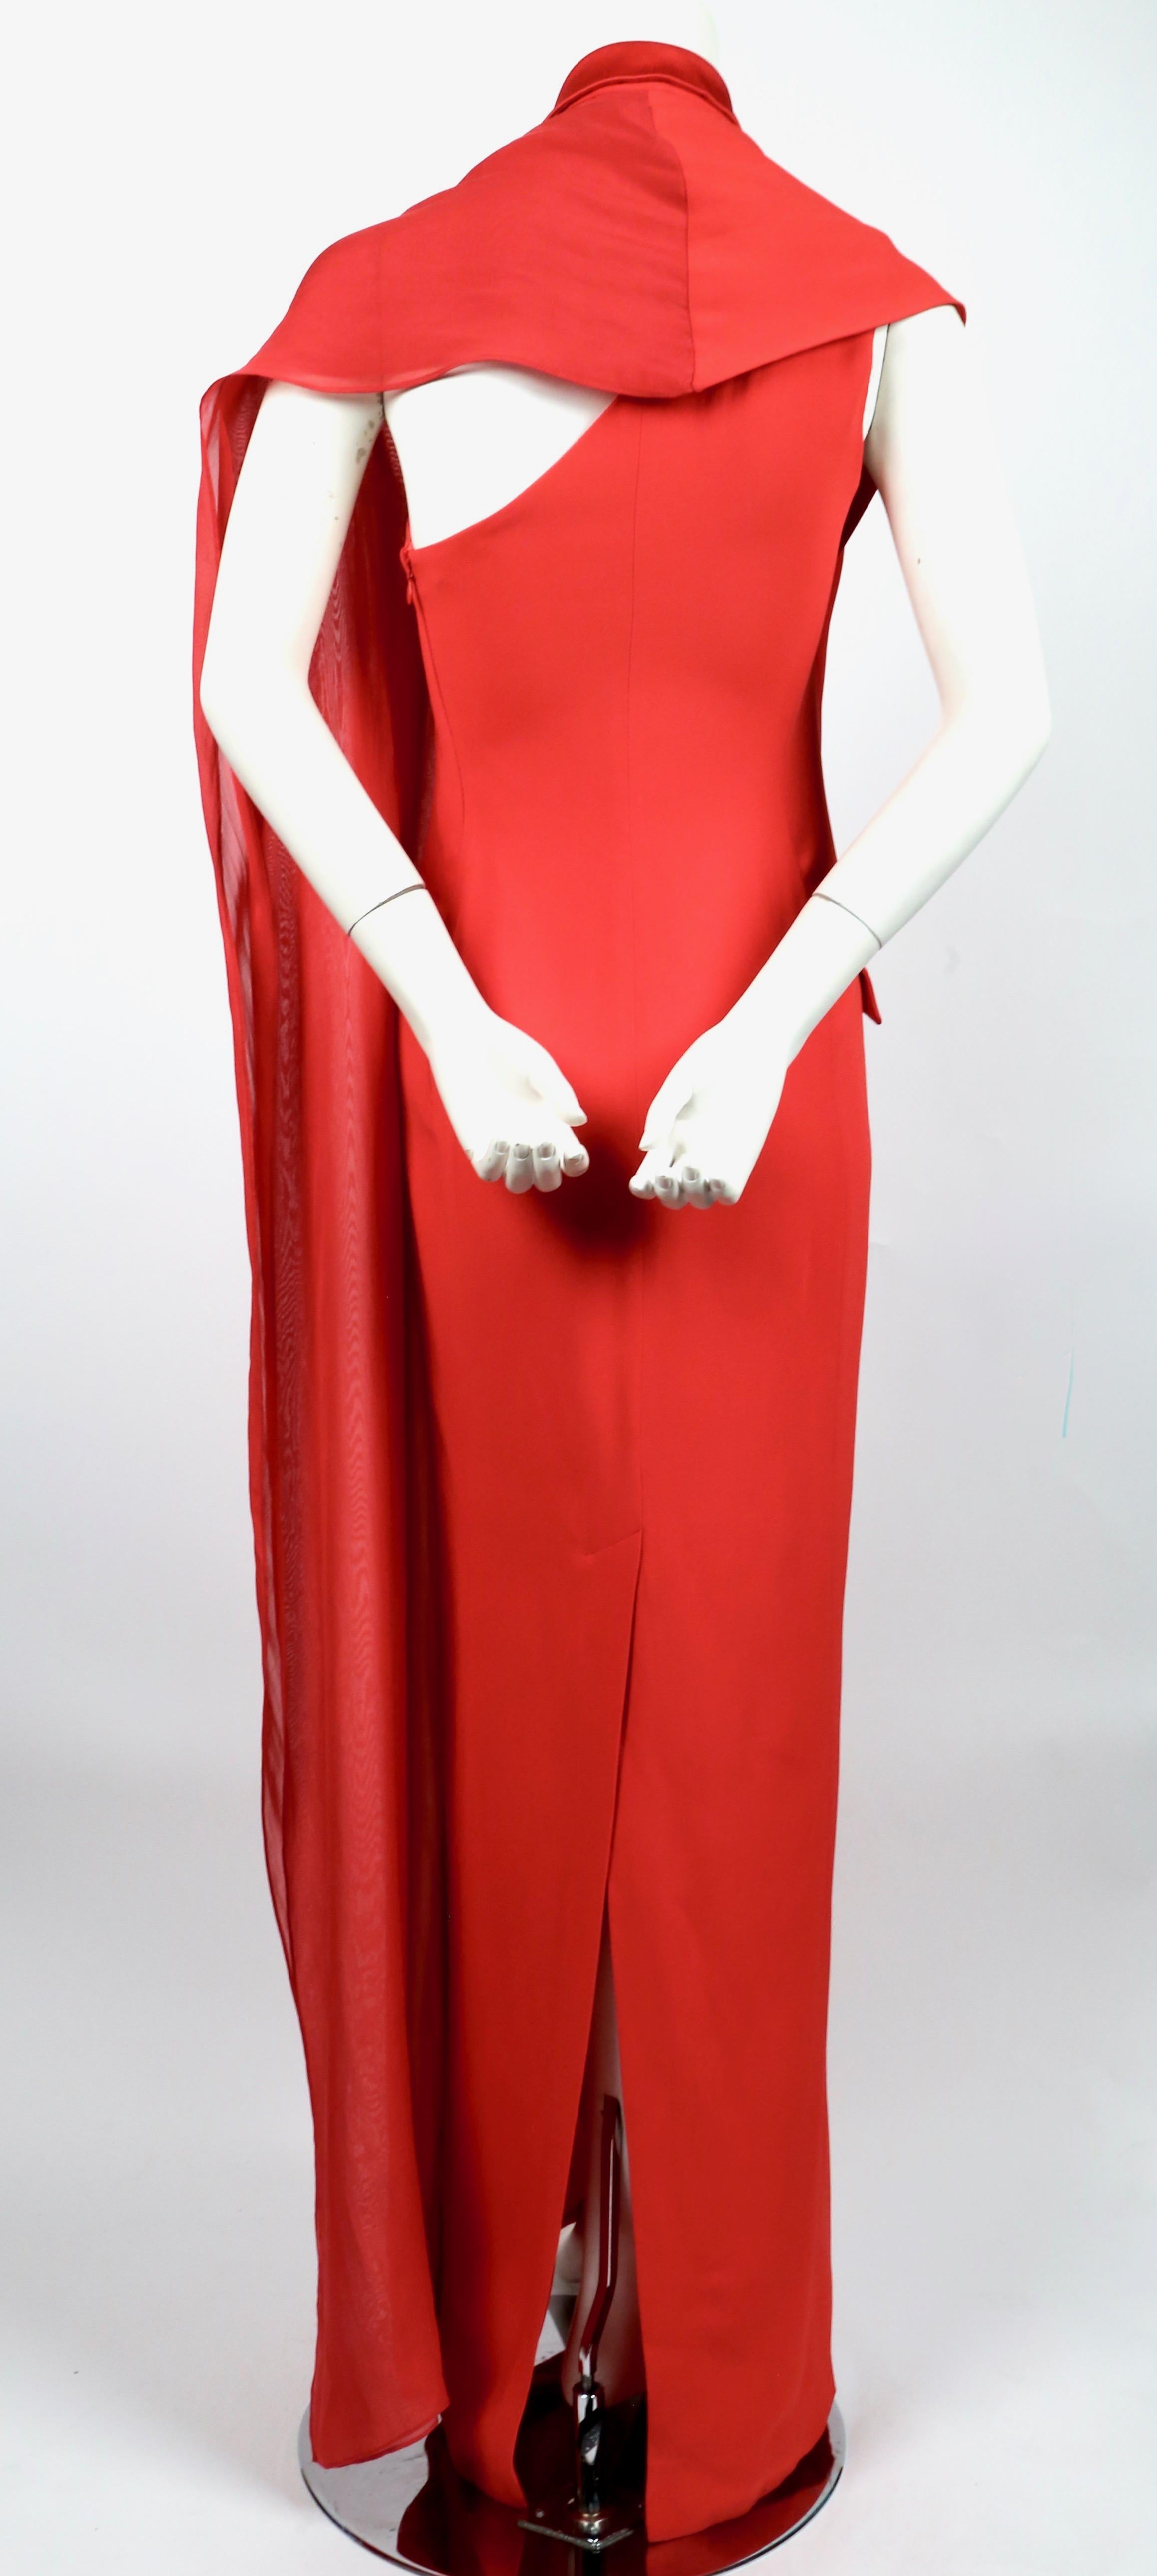 JEAN PAUL GAULTIER red tuxedo gown with draped silk scarf 2